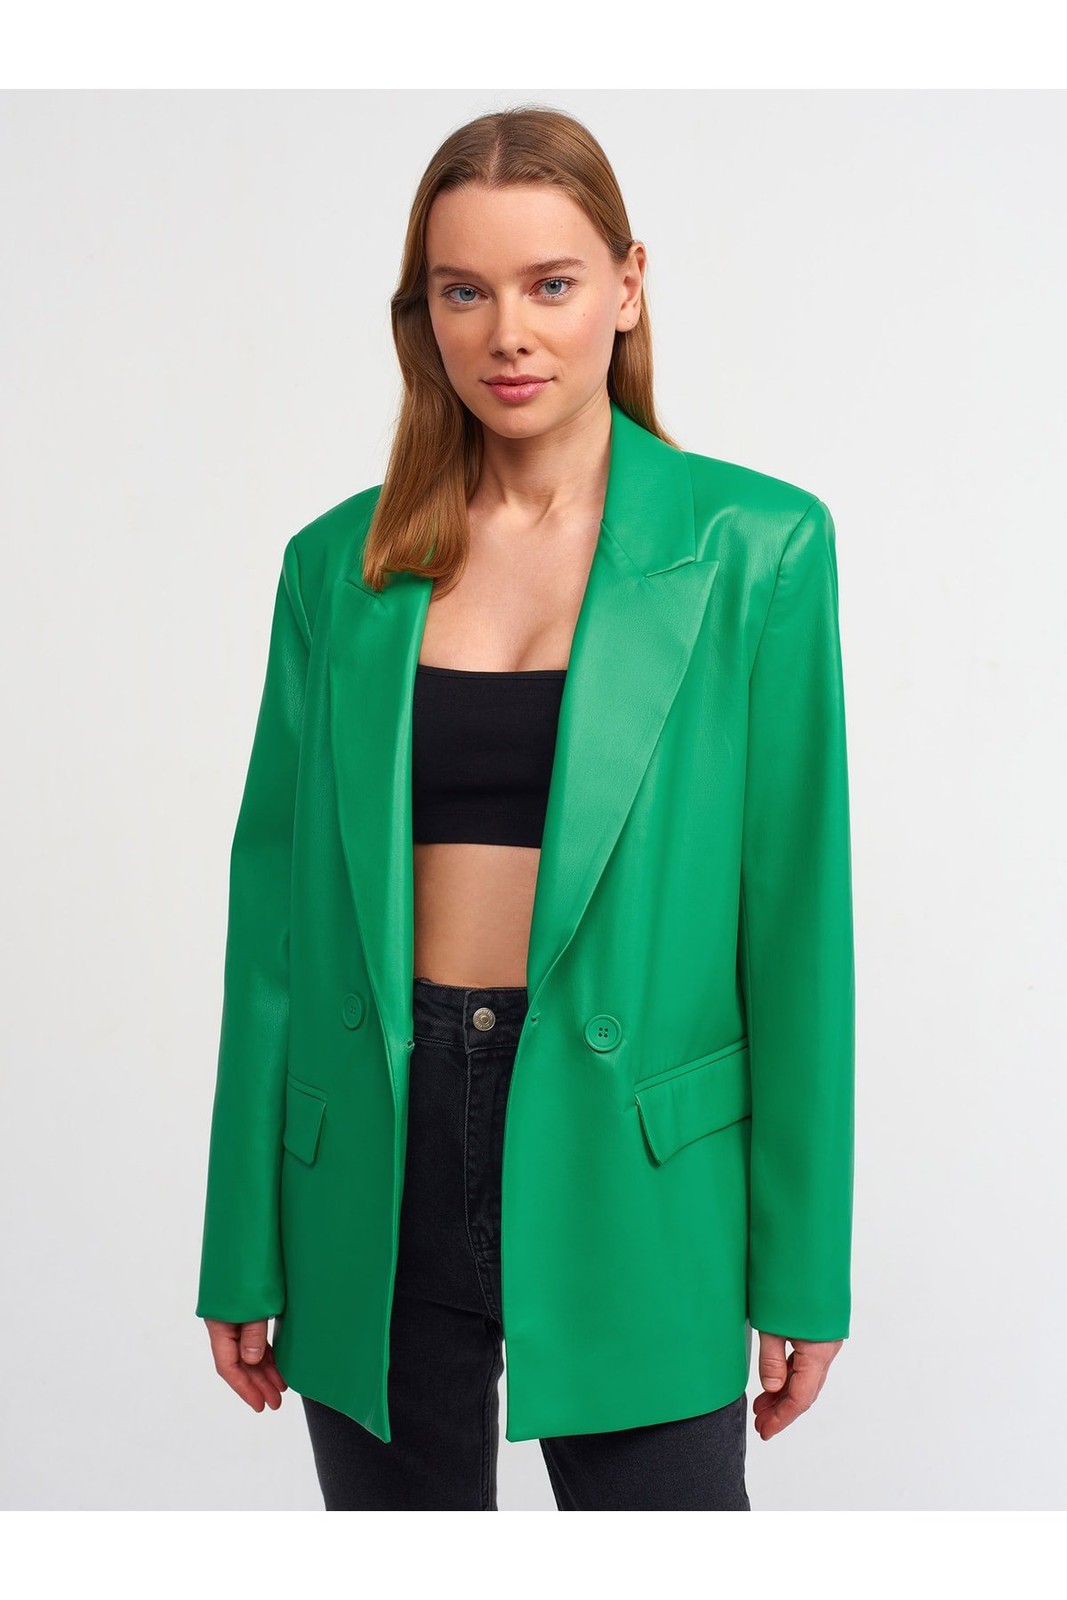 Dilvin 6939 Faux Leather Jacket-green